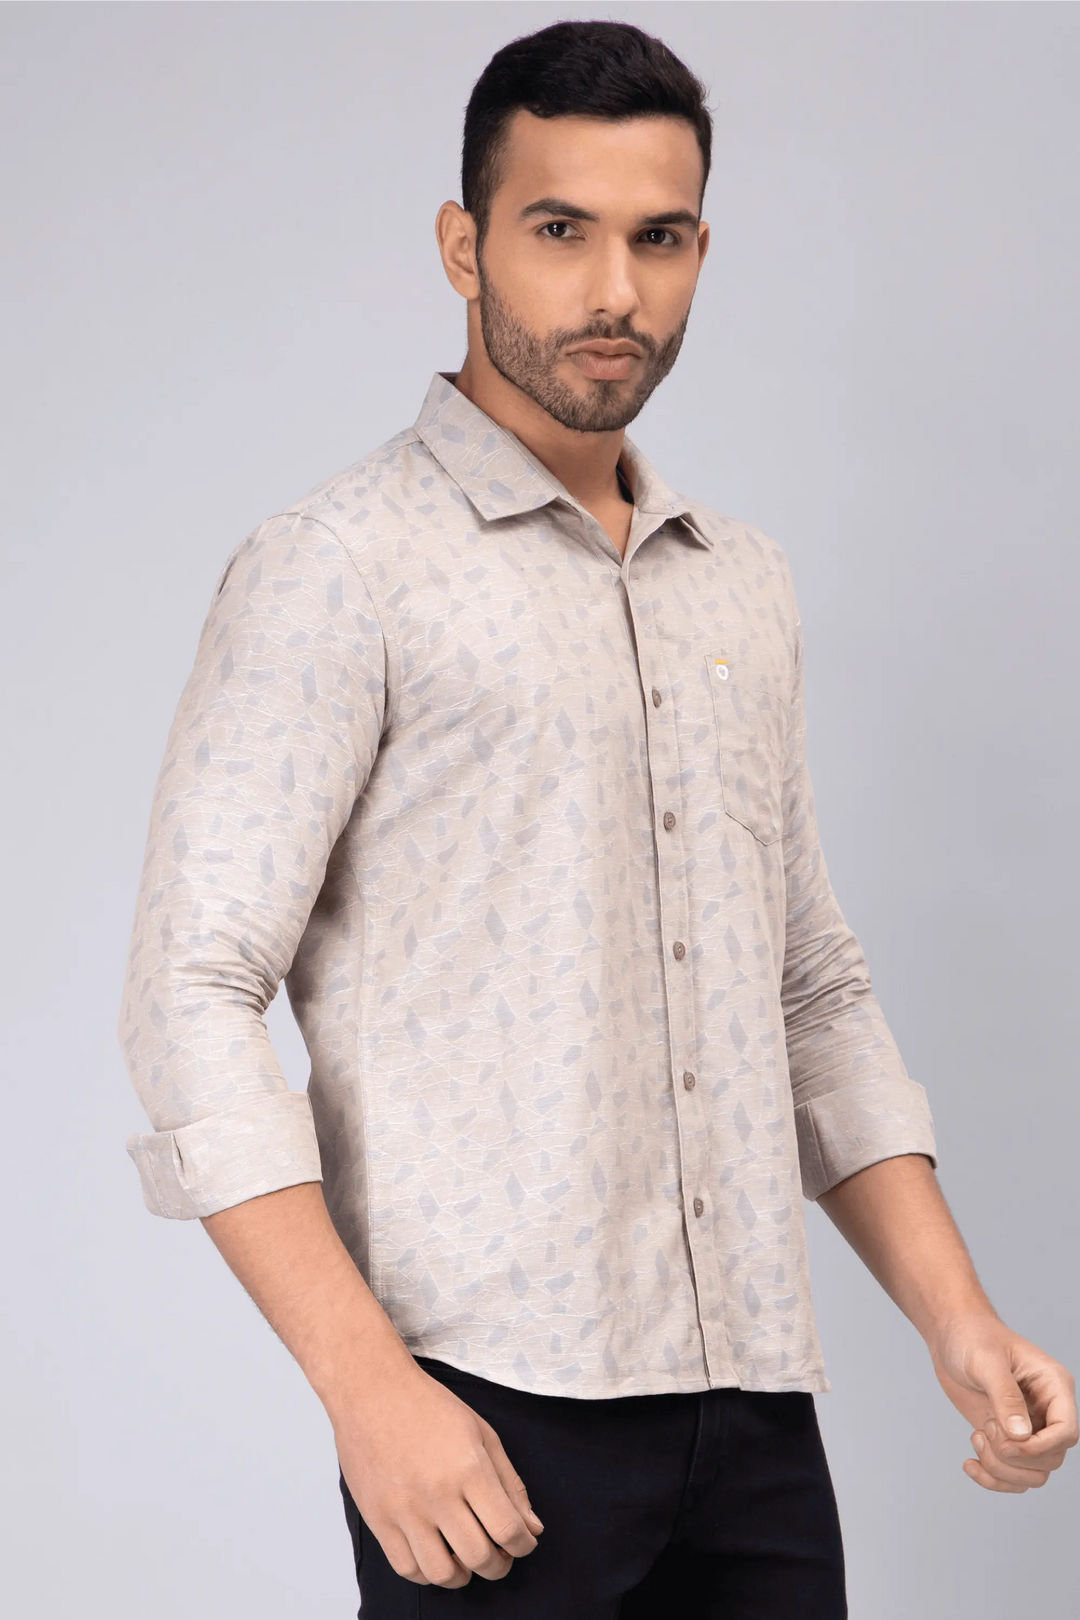 Regular Fit Cotton Bright Grey Printed Casual Shirt For Men - Peplos Jeans 